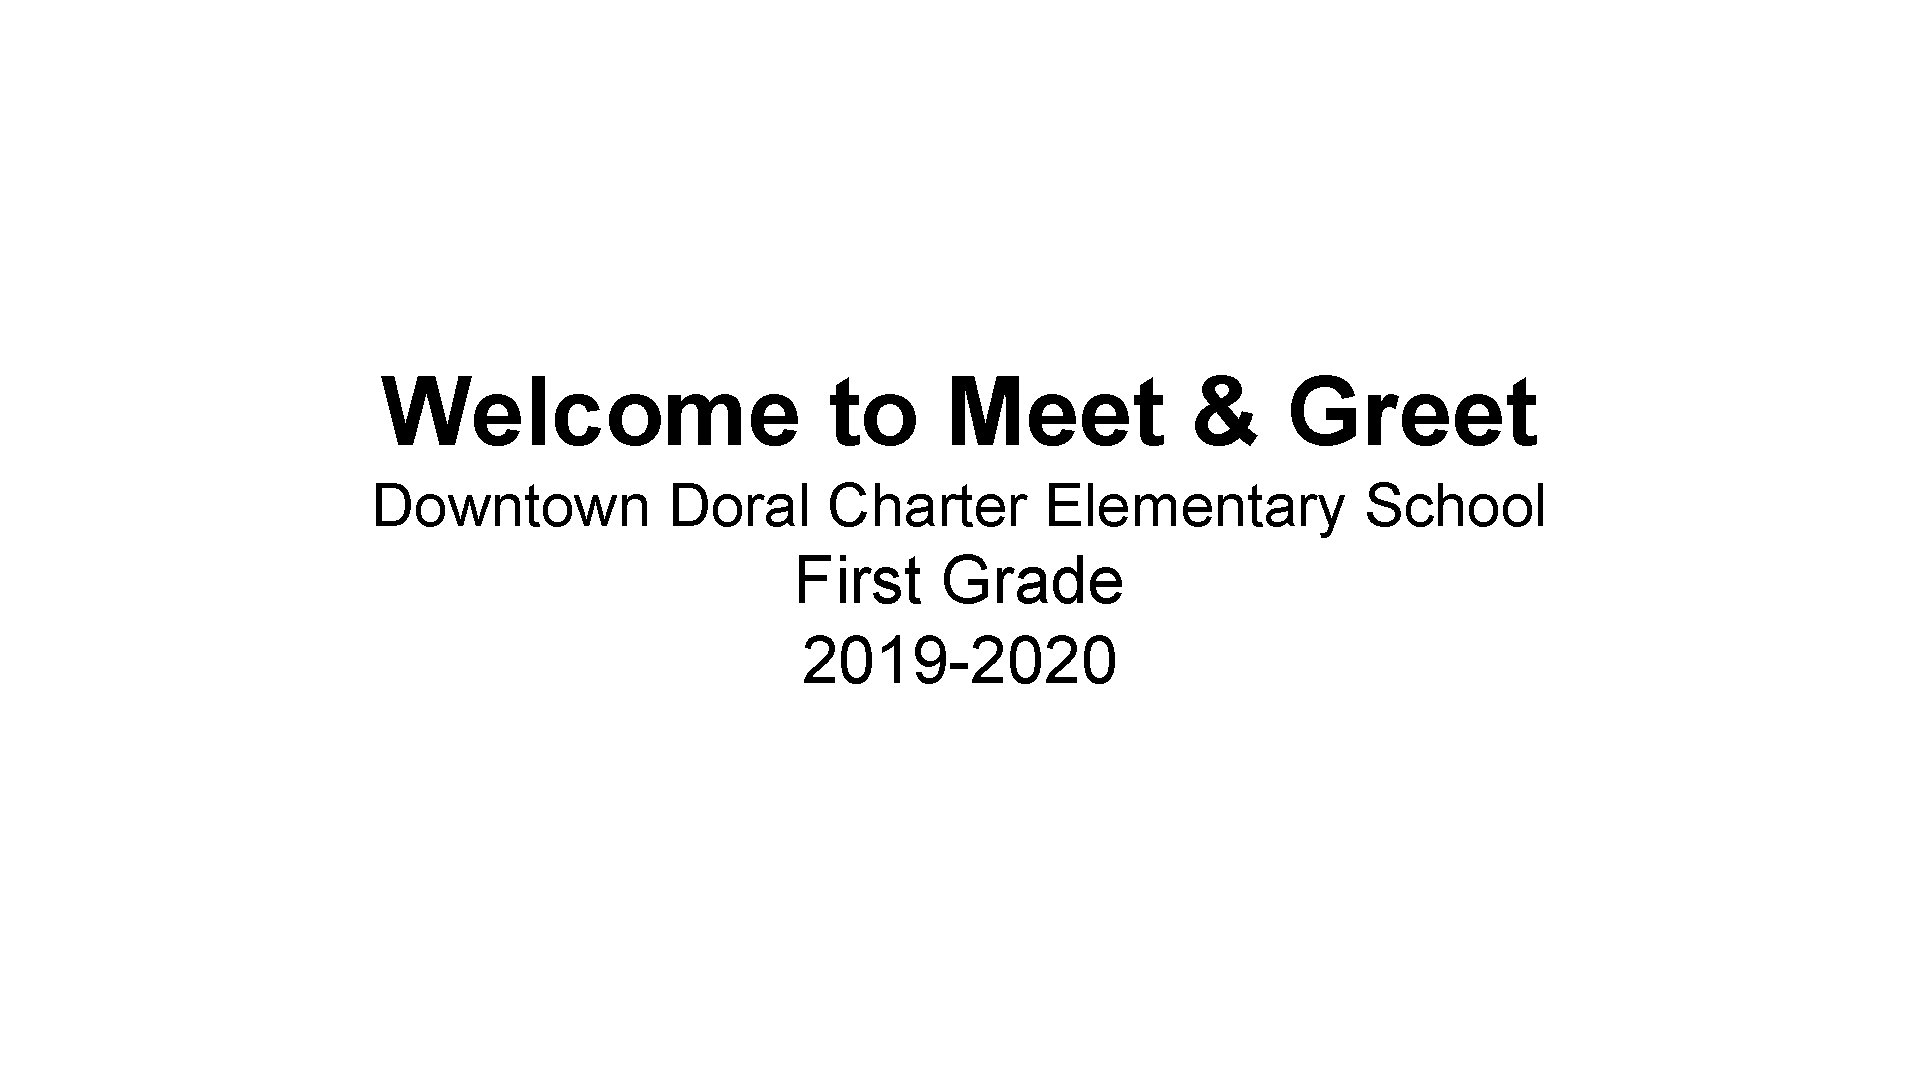 Welcome to Meet & Greet Downtown Doral Charter Elementary School First Grade 2019 -2020